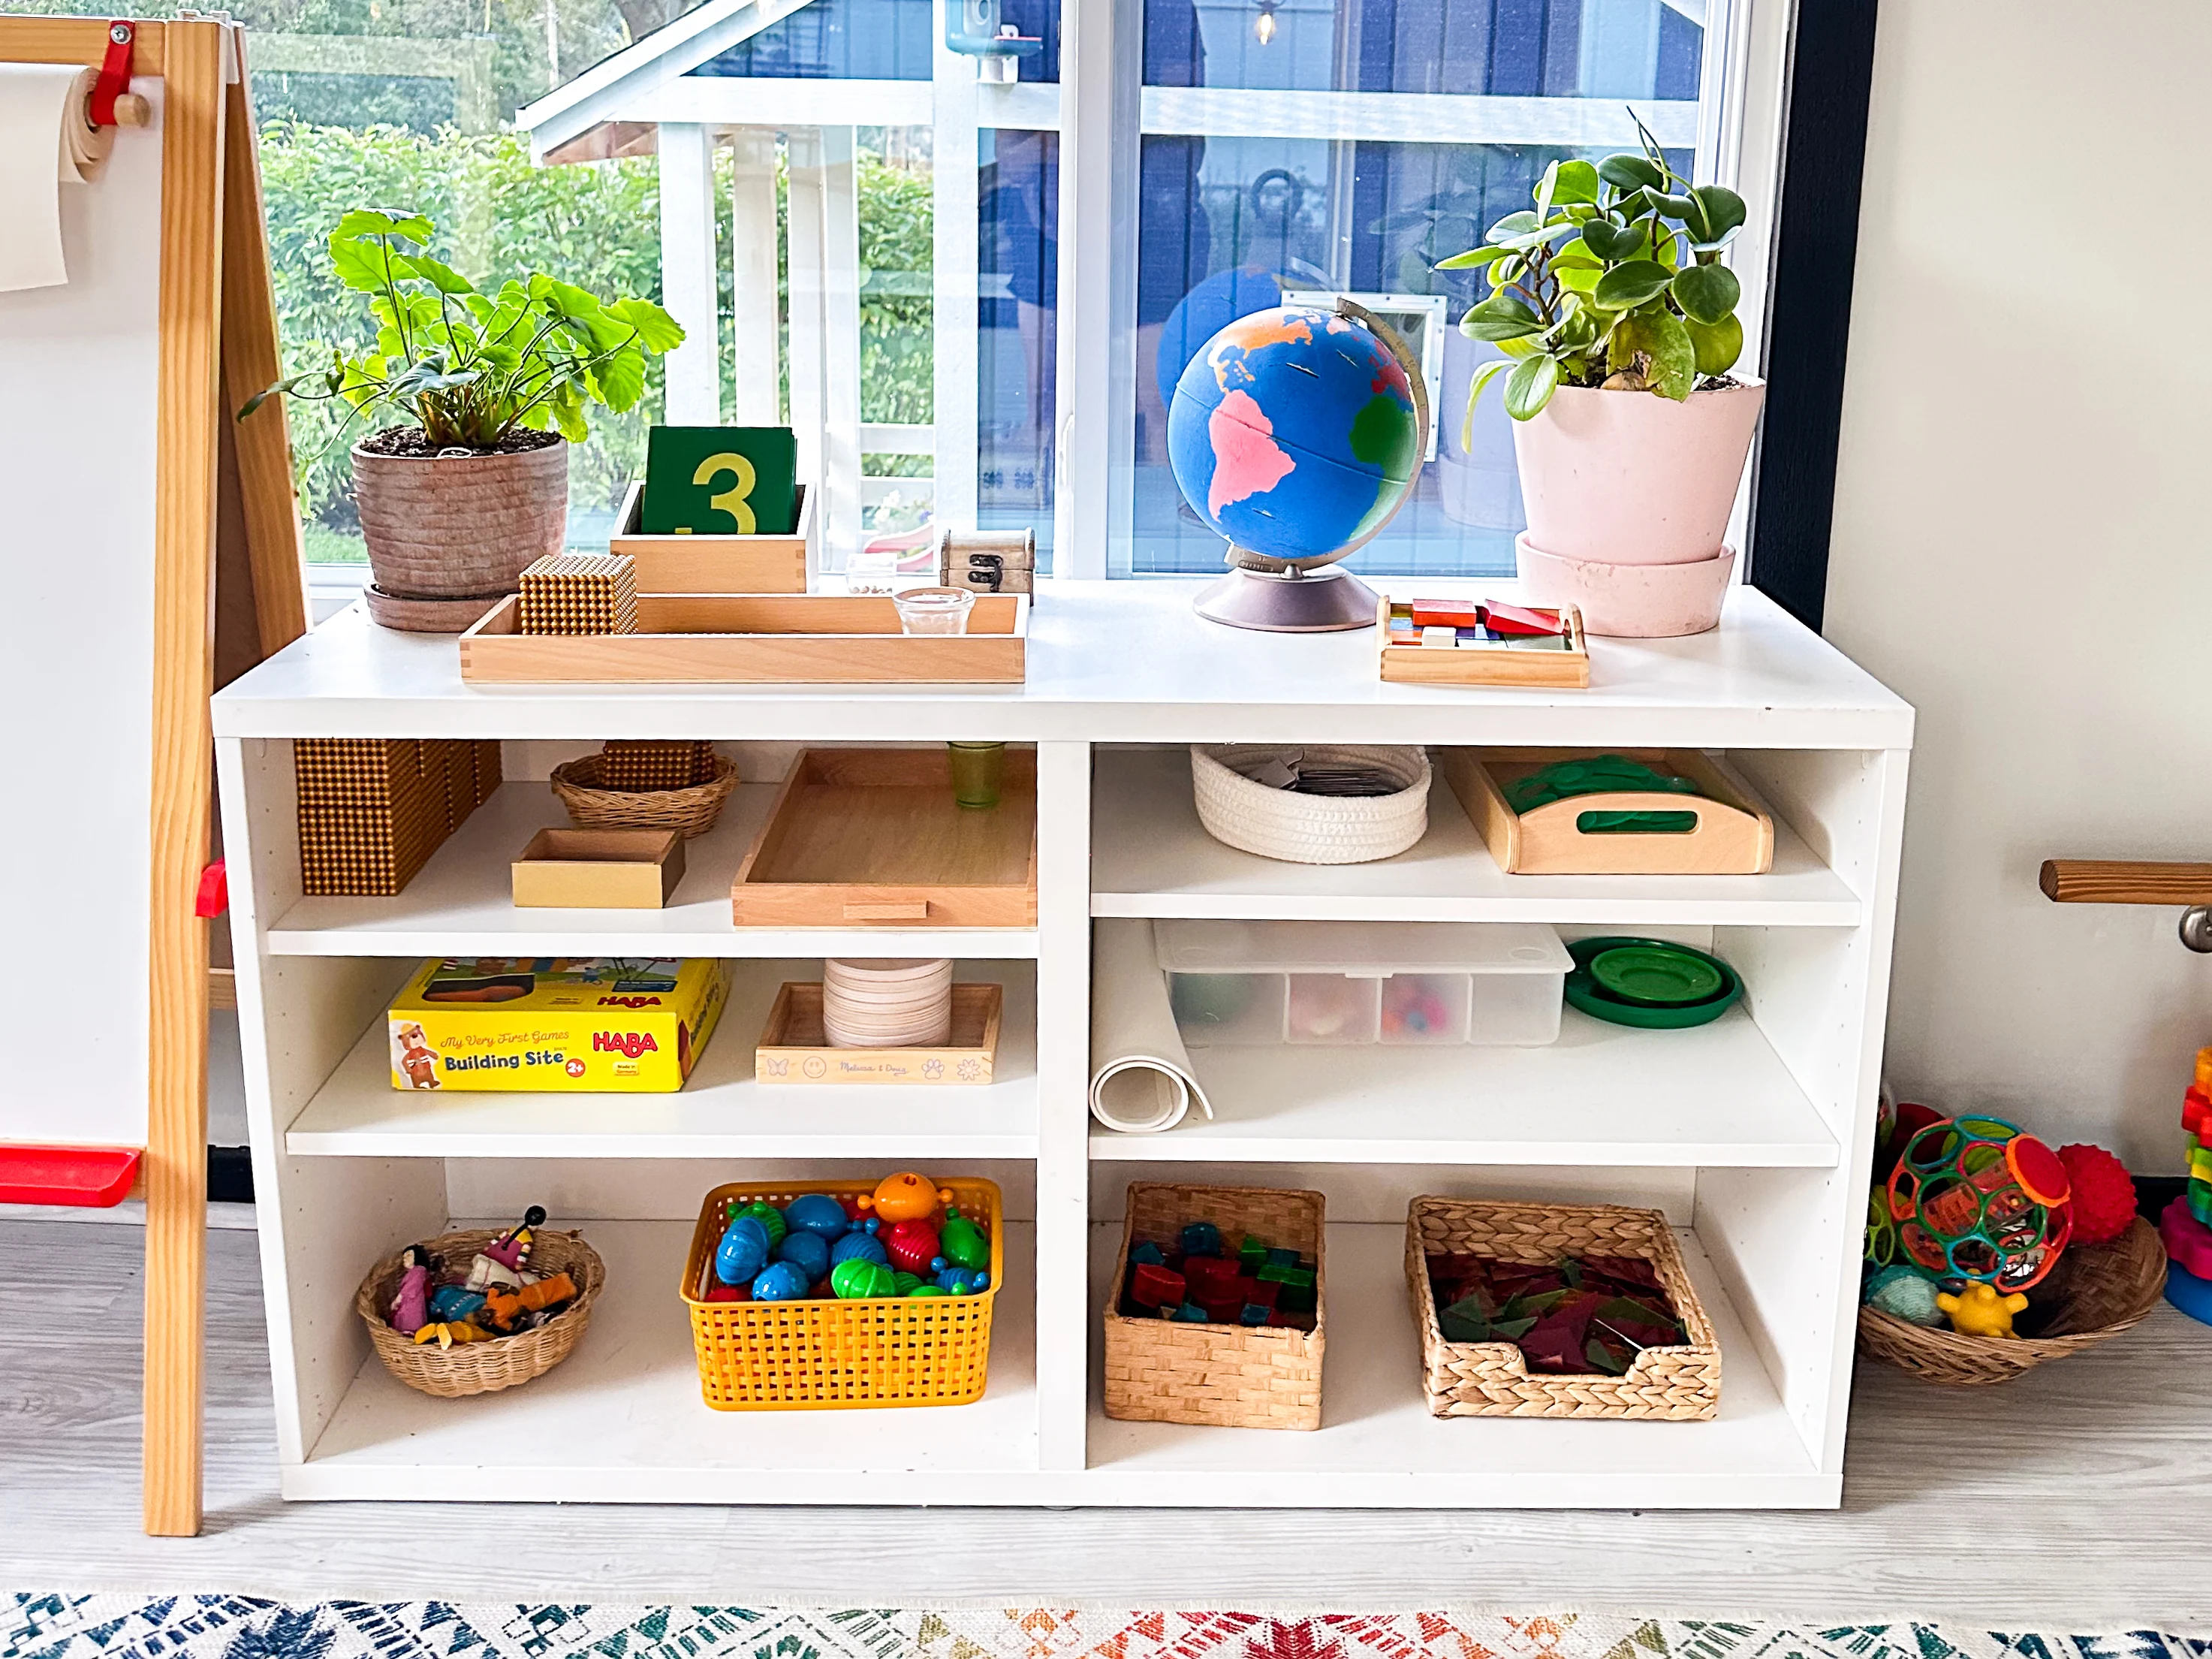 A Montessori playroom shelf with learning activities and traditional Montessori academic toys